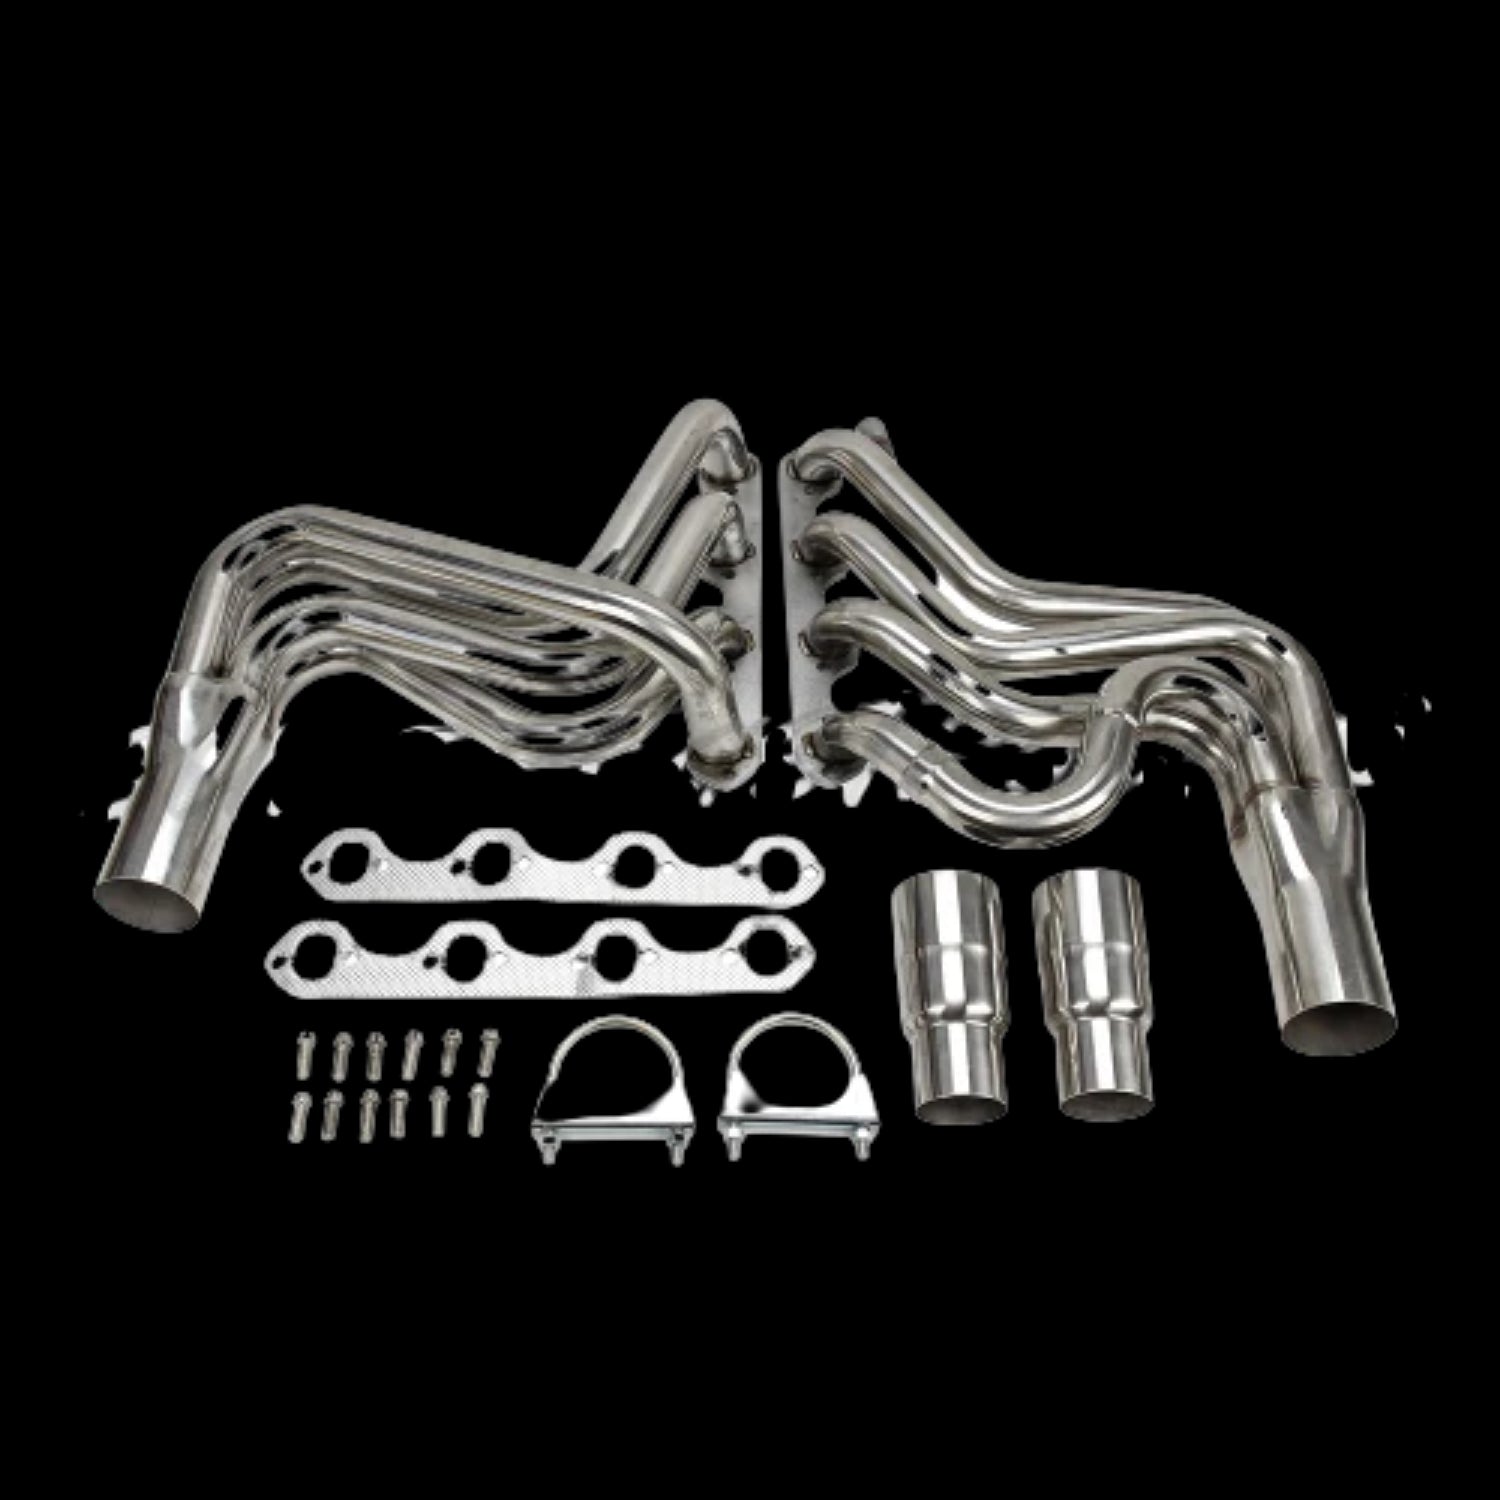 Manifold Exhaust Headers Fits for 1987-1996 Ford F150 F250 Bronco 5.8L V8